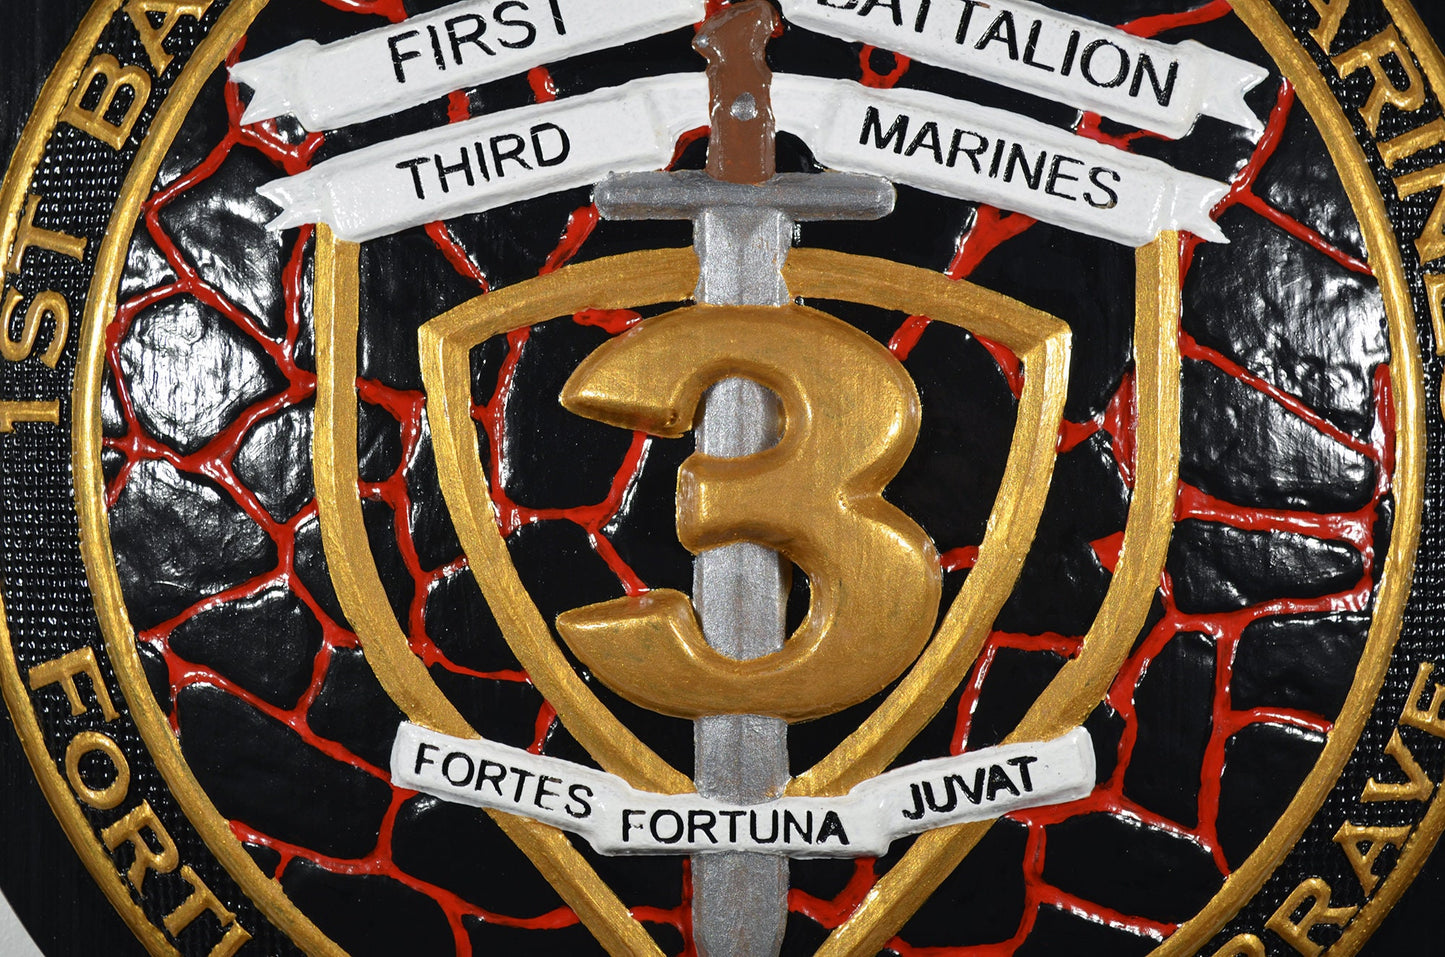 USMC 1st Battalion 3rd Marine Division, hand painted 3d wood carving, military plaque